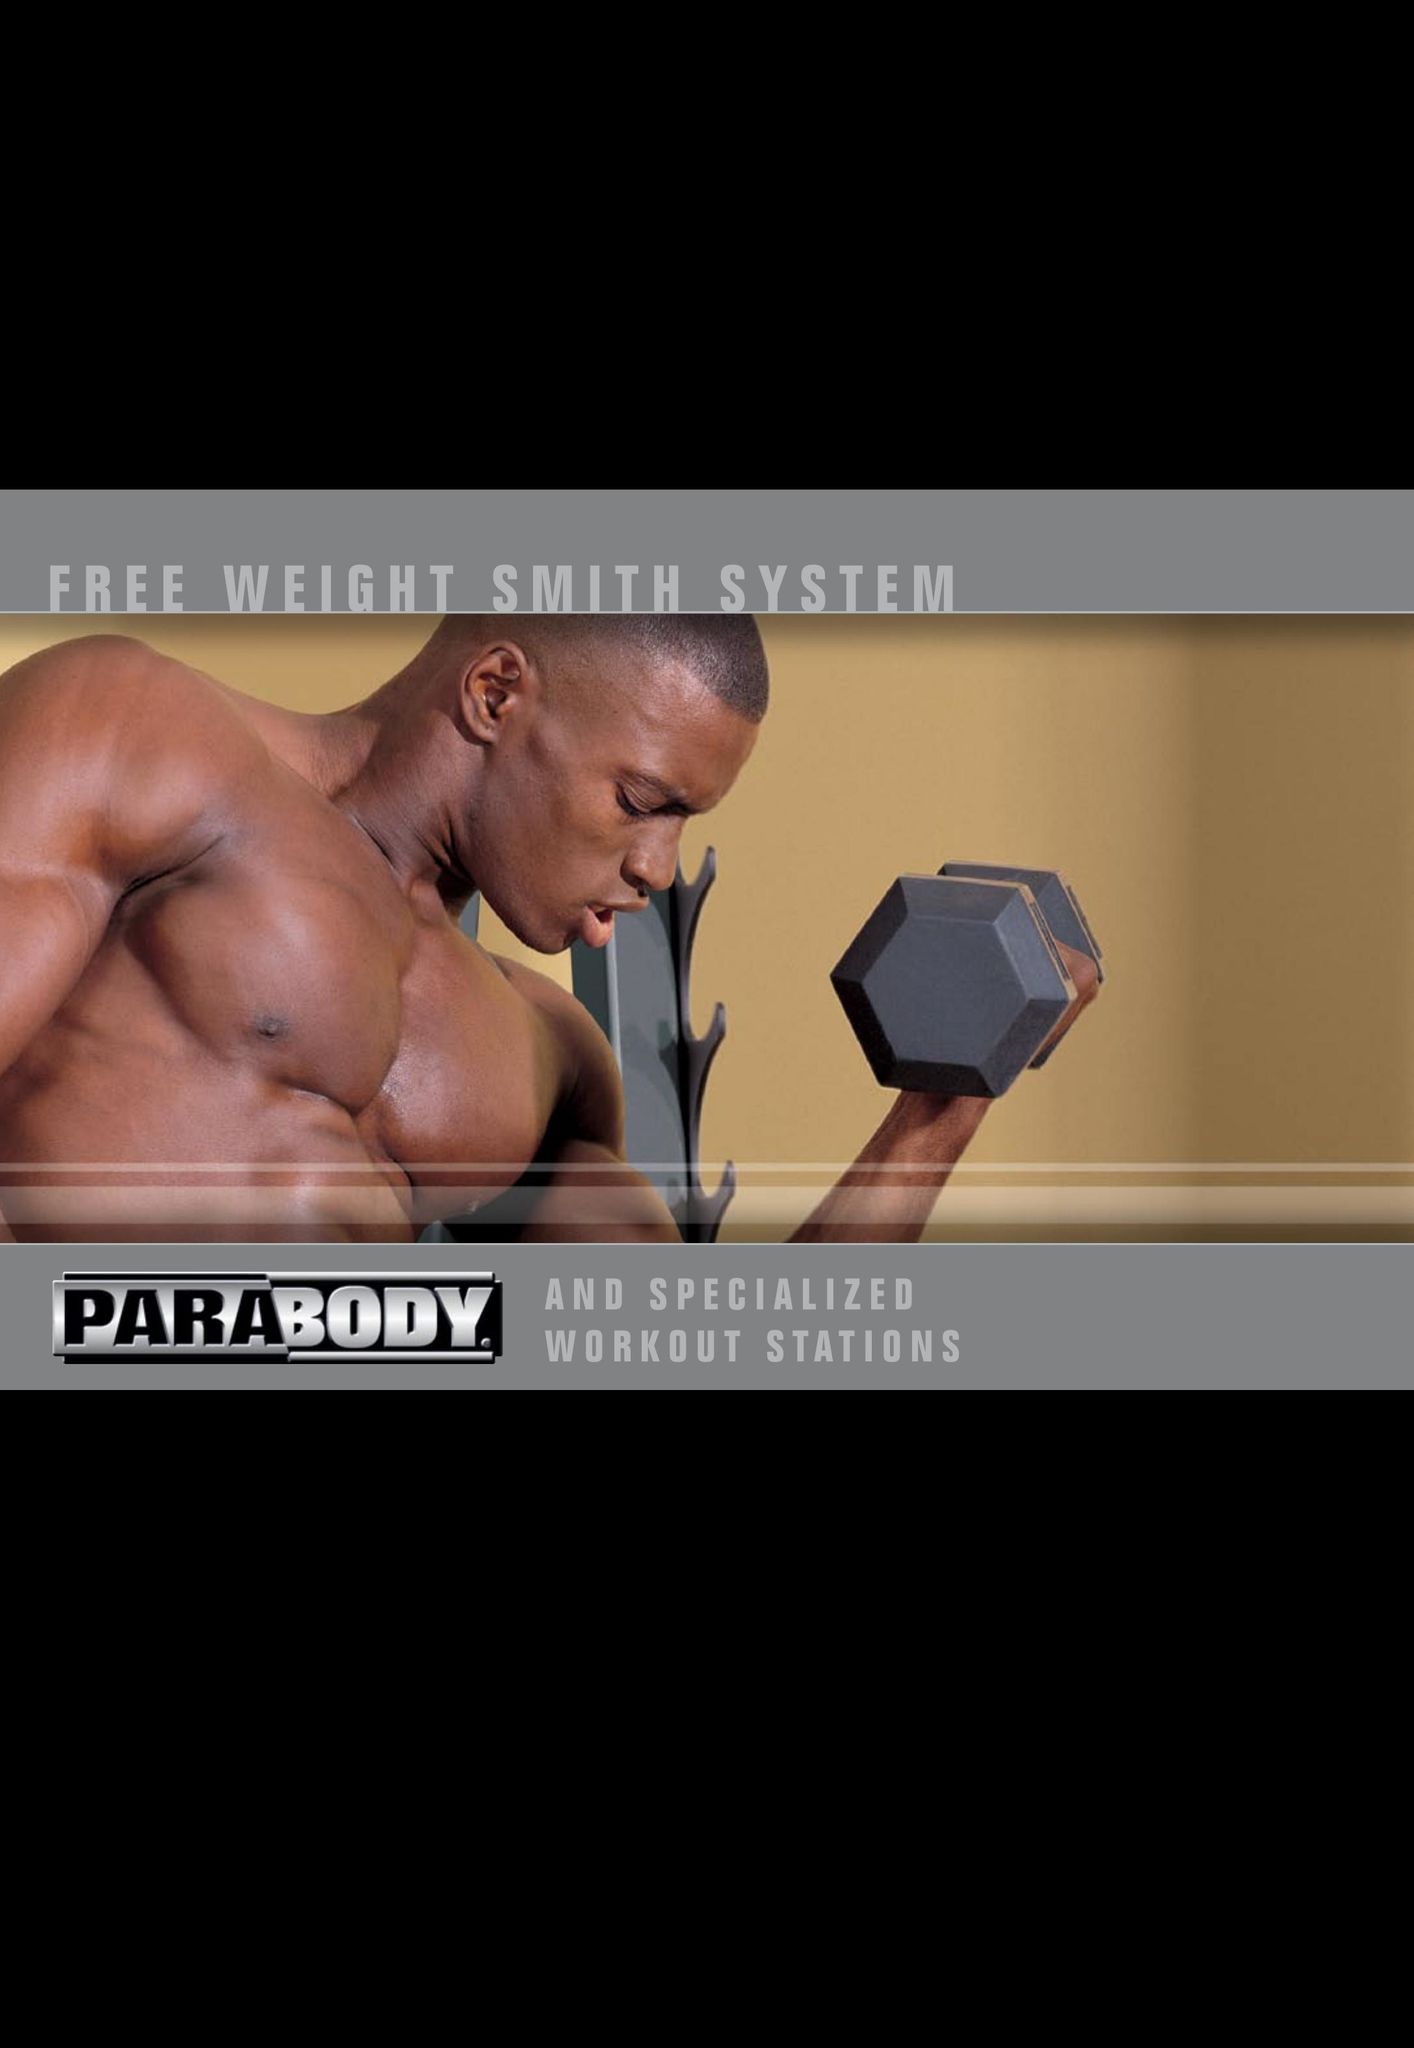 ParaBody Free Weight Smith System Fitness Equipment User Manual